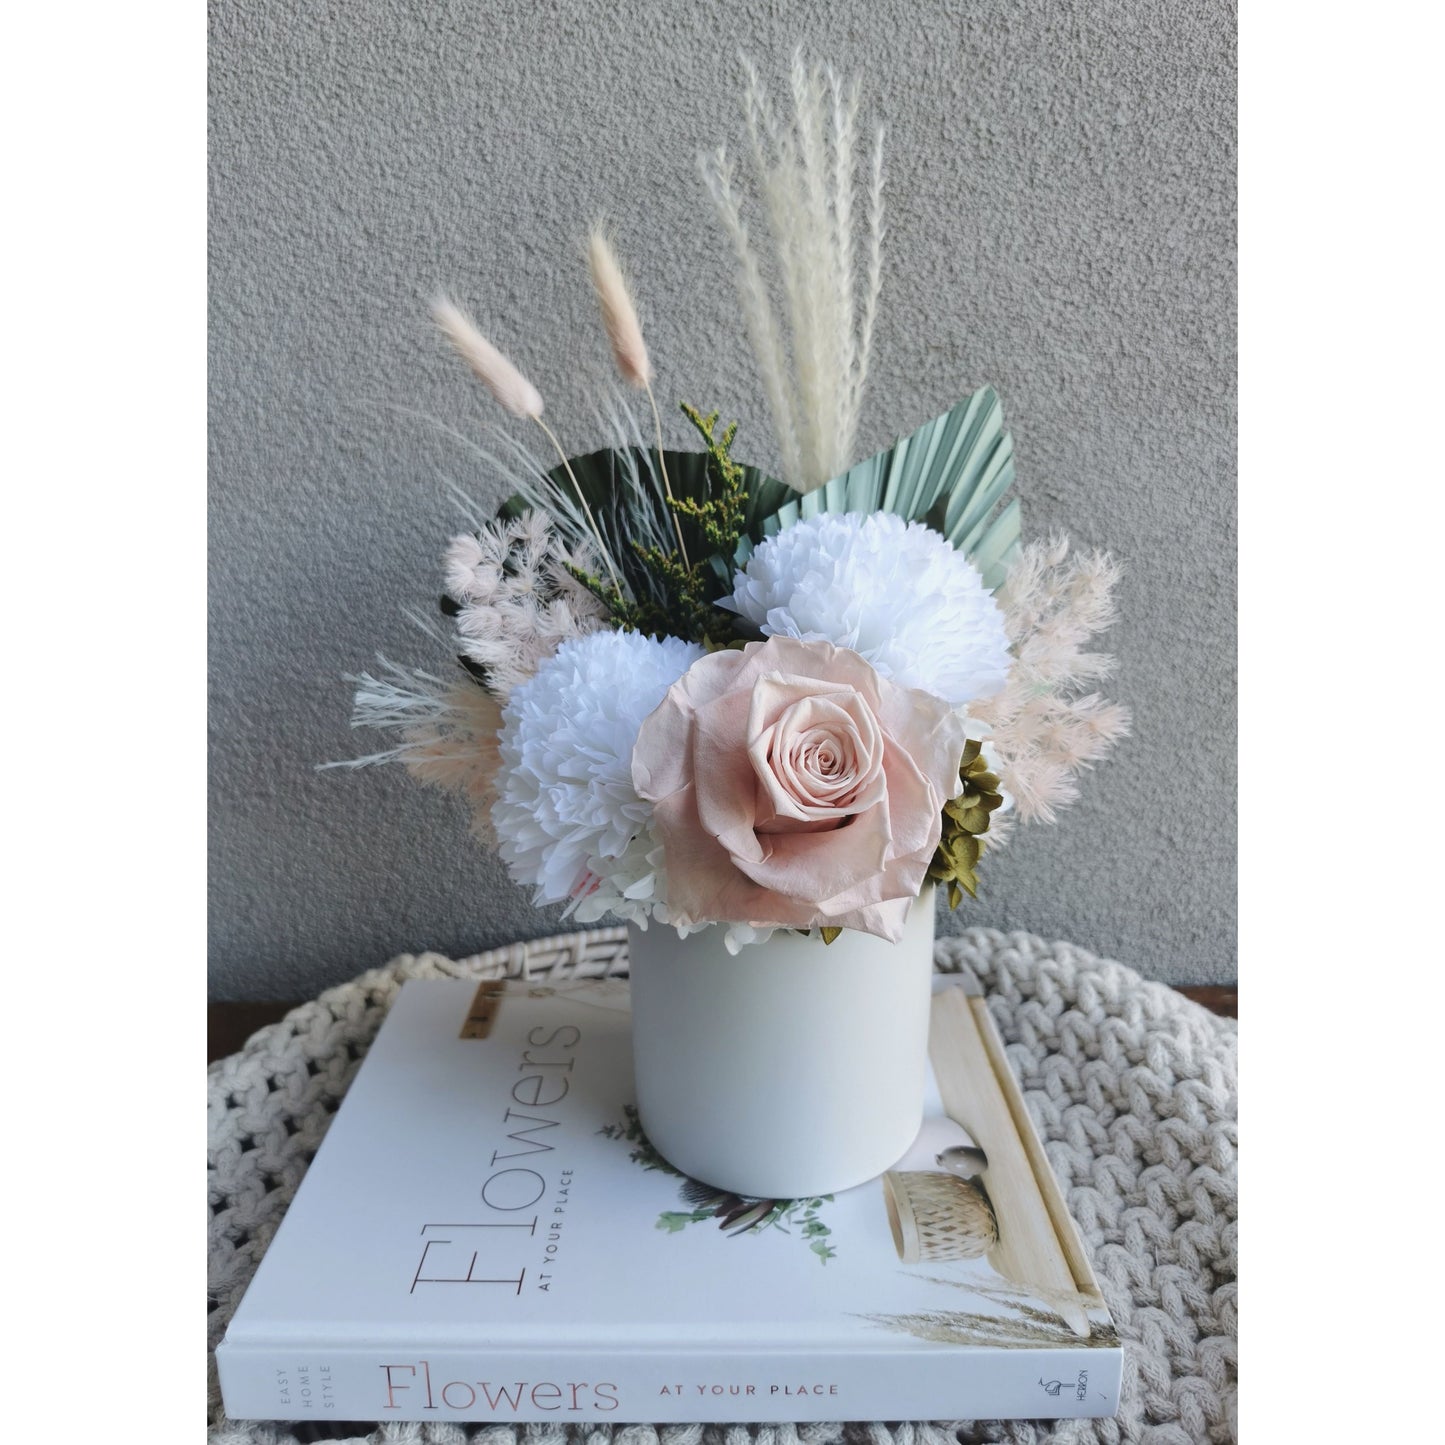 Pink, green & white dried & preserved flower arrangement in white pot. Photo shows arrangement sitting on a book against a blank wall